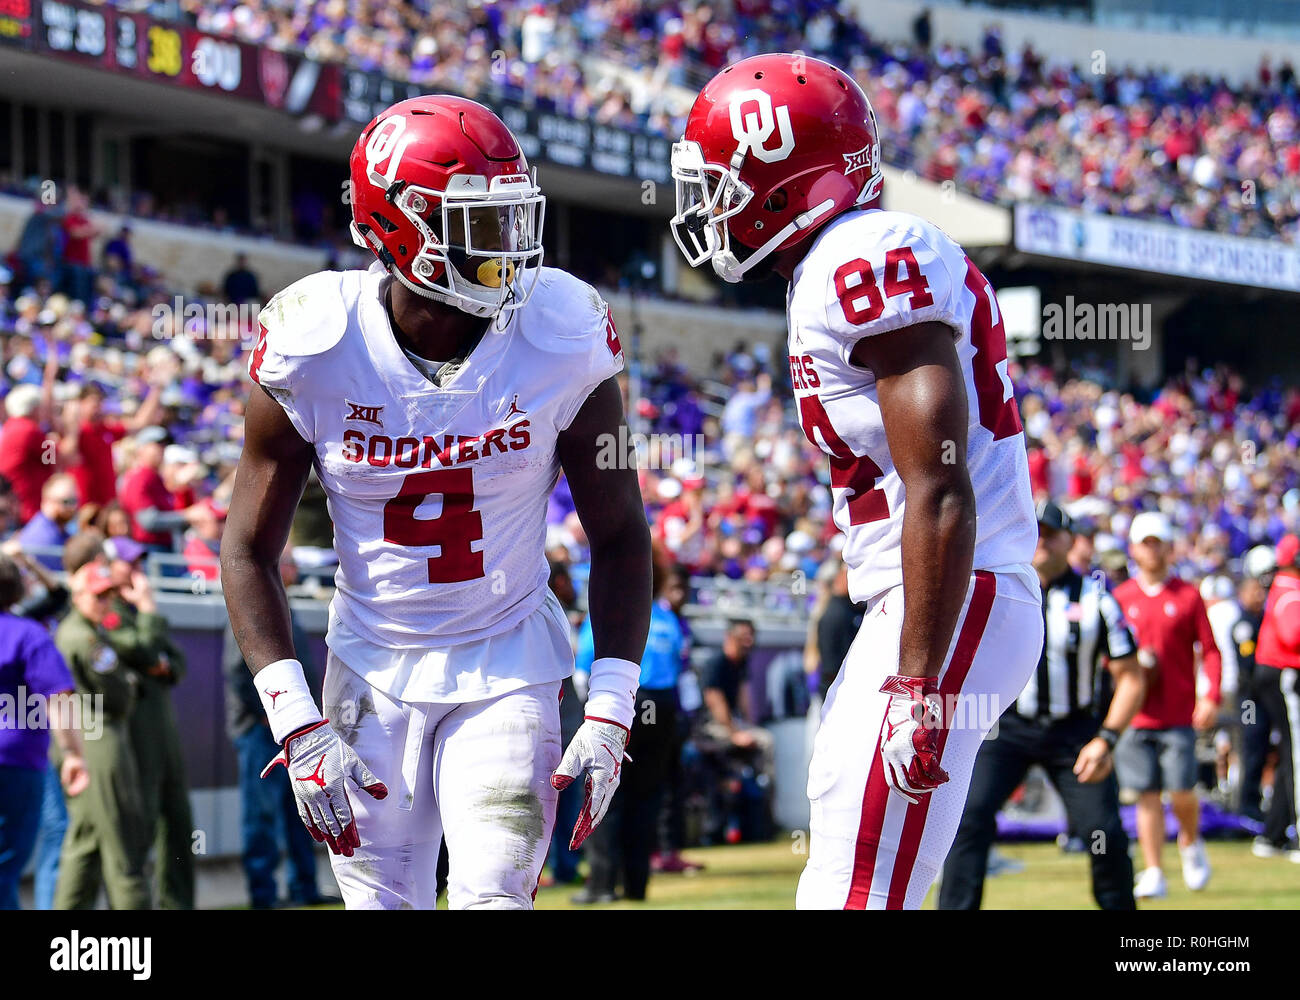 Oklahoma Sooners running back Trey Sermon (4) rushes for a touchdown as he celebrates with Oklahoma Sooners wide receiver Lee Morris (84) during the Oklahoma Sooners at TCU Horned Frogs at an NCAA Football game at the Amon G. Carter Stadium, Fort Worth Texas. 10/20/18.Manny Flores/Cal Sport Media. Stock Photo